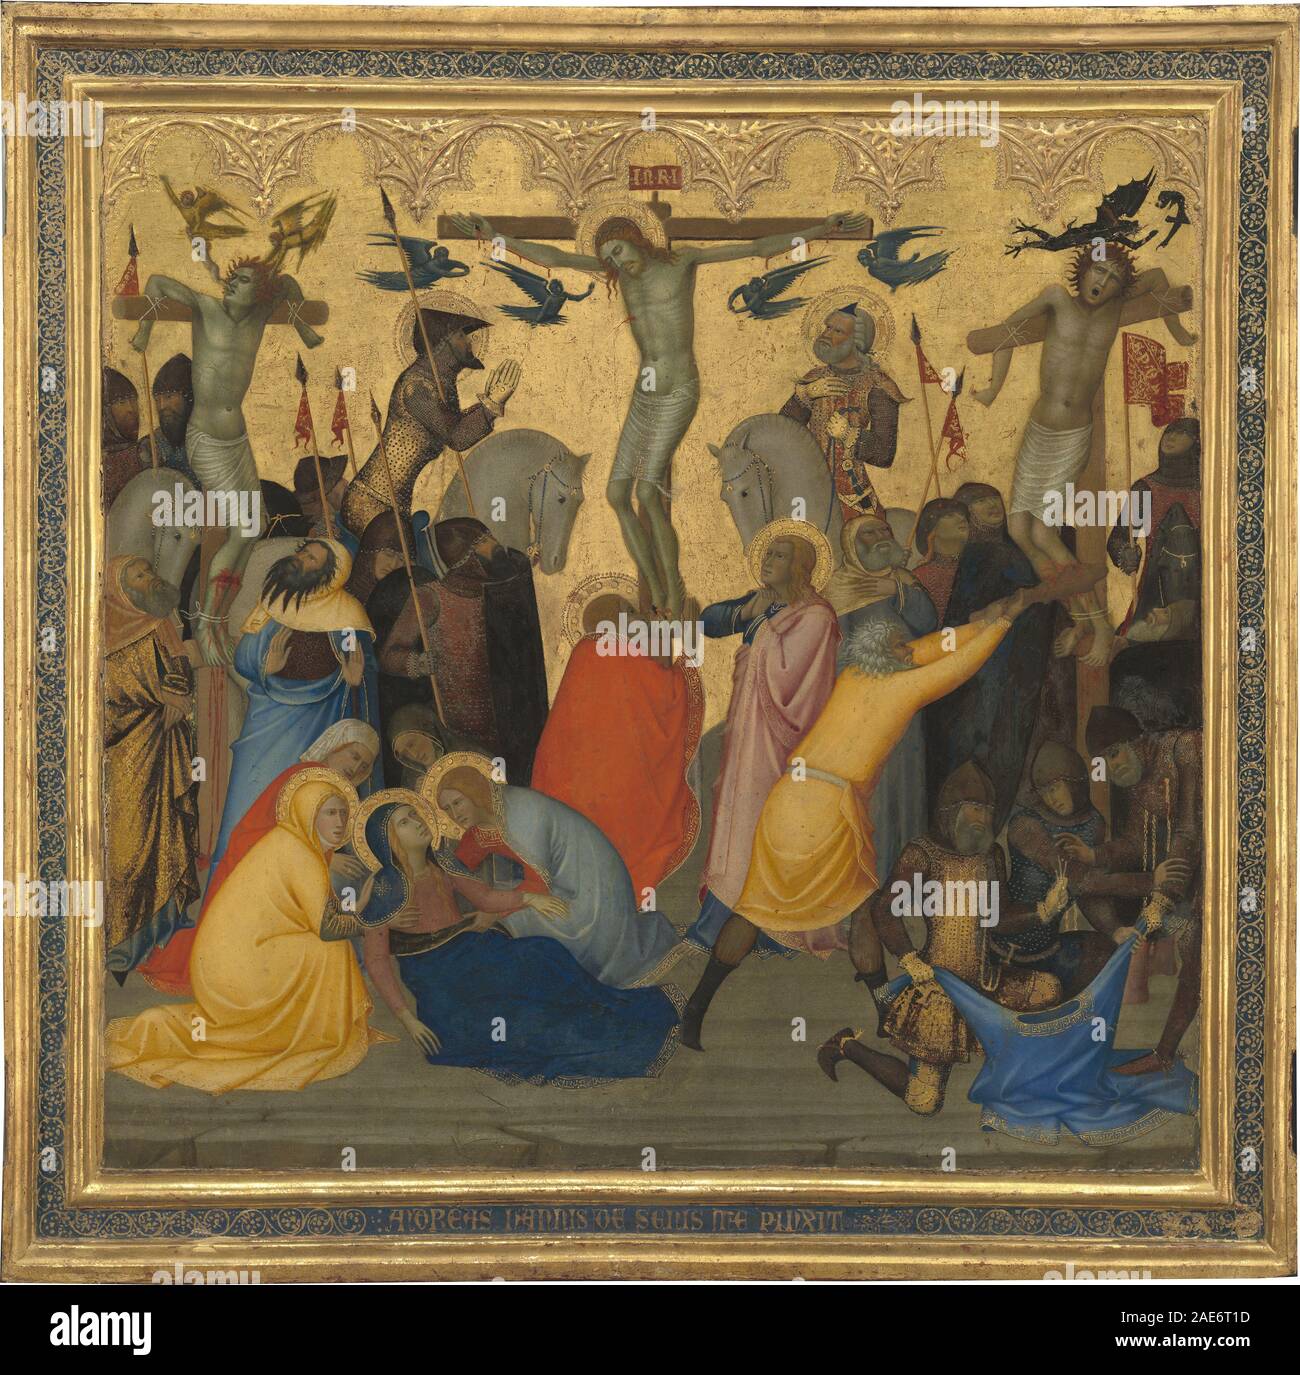 Scenes from the Passion of Christ: The Crucifixion [middle panel]; 1380s Andrea Vanni, Scenes from the Passion of Christ - The Crucifixion (middle panel), 1380s Stock Photo